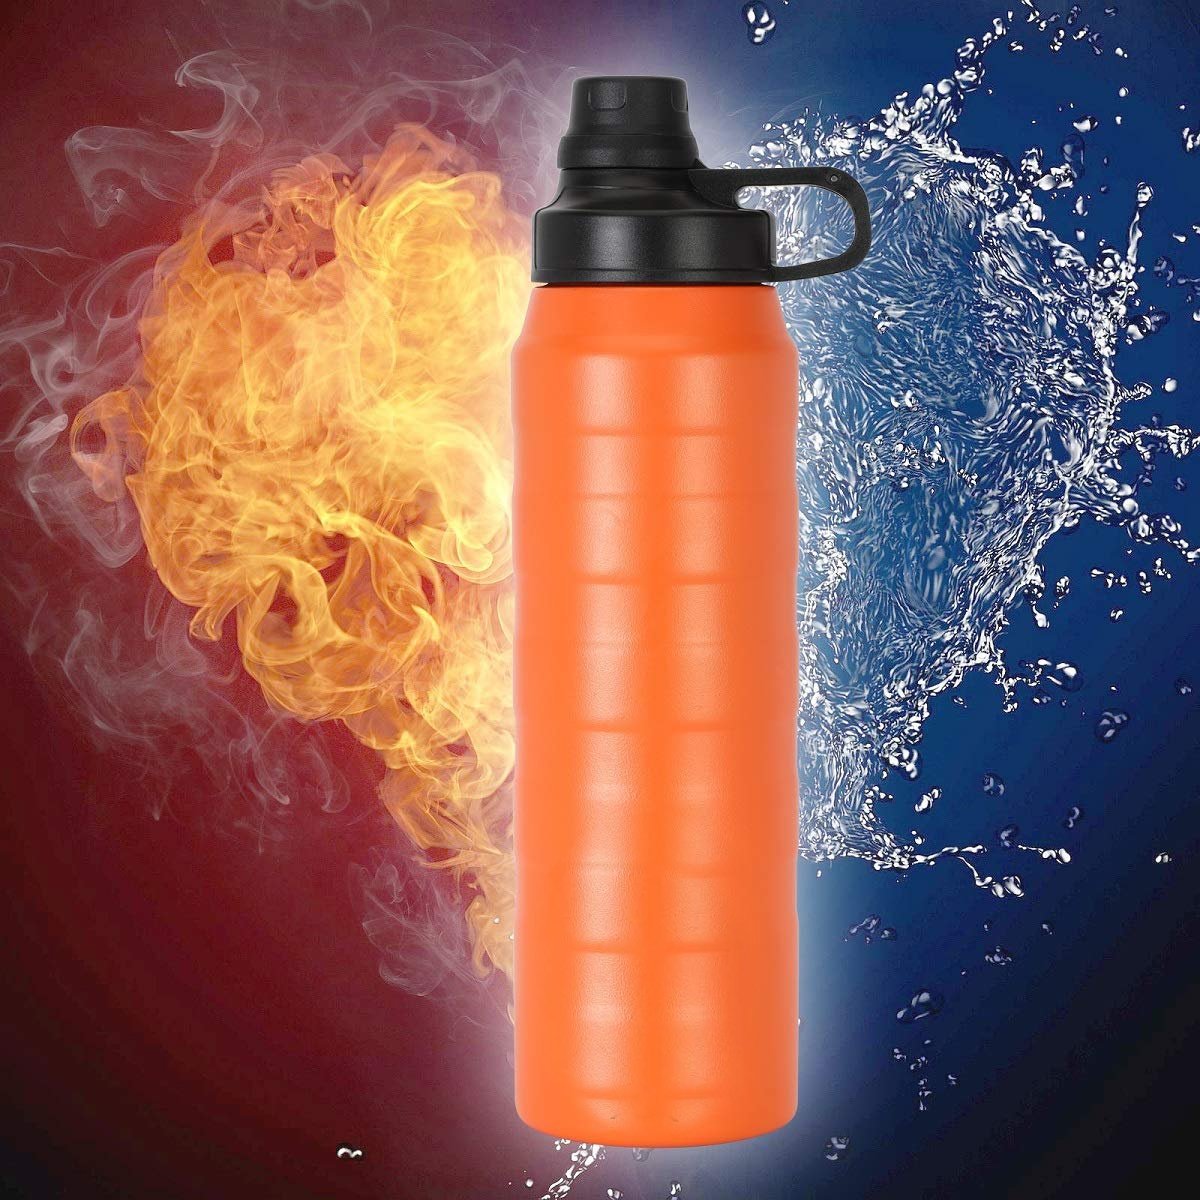 0327 Water Bottle Thermo Steel 900ml, Thermos Flask Water Bottle for Cold Water - SkyShopy